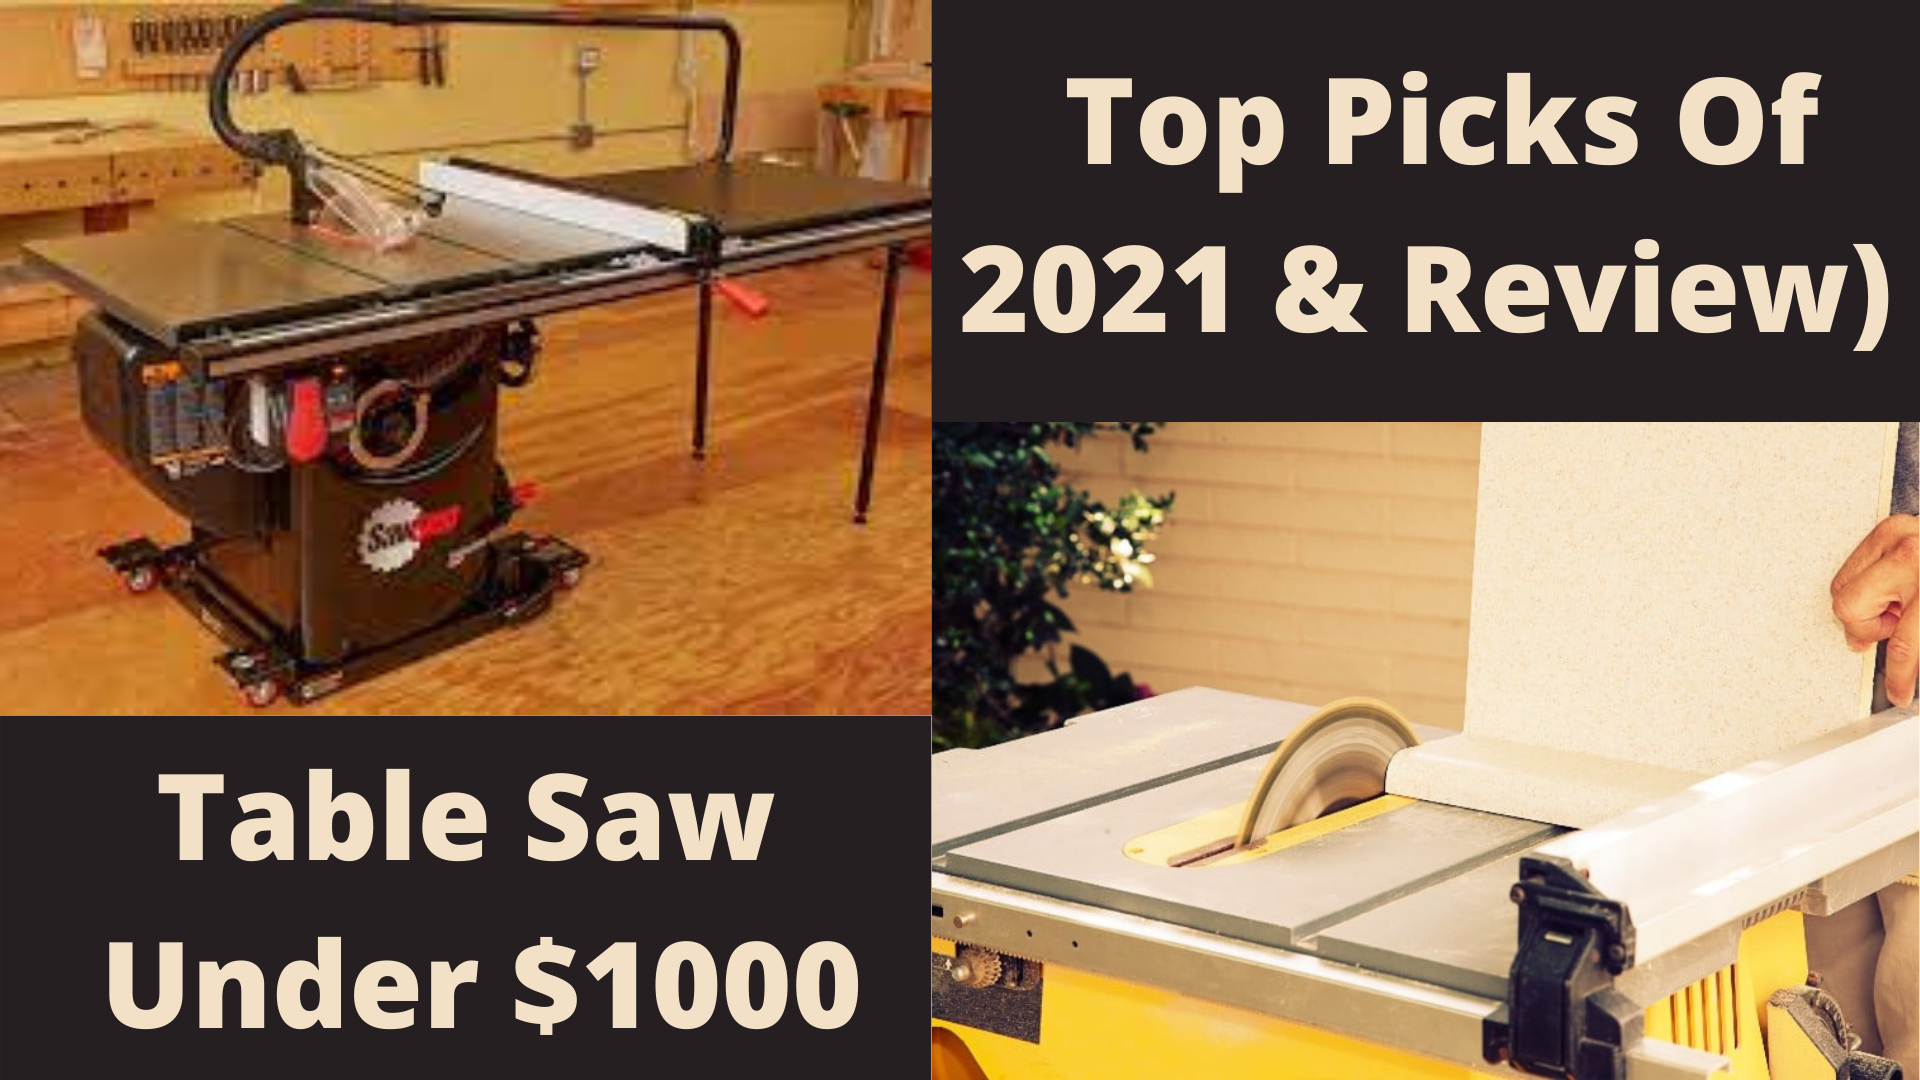 Best Table Saw Under 1000 Dollars